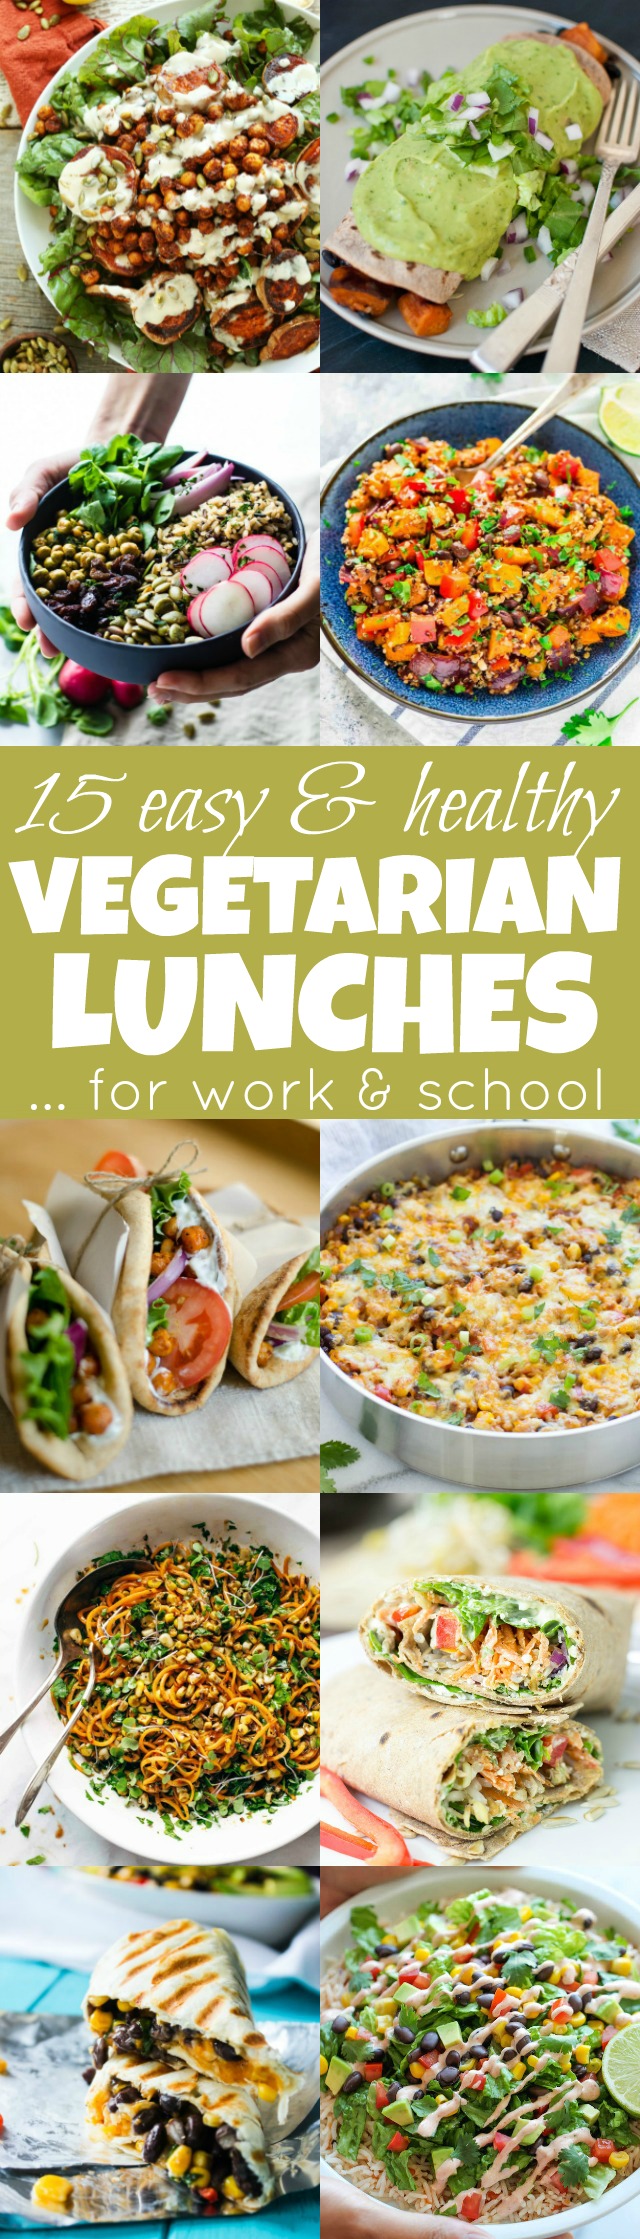 Stuck in a meal prep rut? Get inspired by these easy & healthy vegetarian lunches! They're nutritious, delicious and perfect to pack for work and school! | runningwithspoons.com